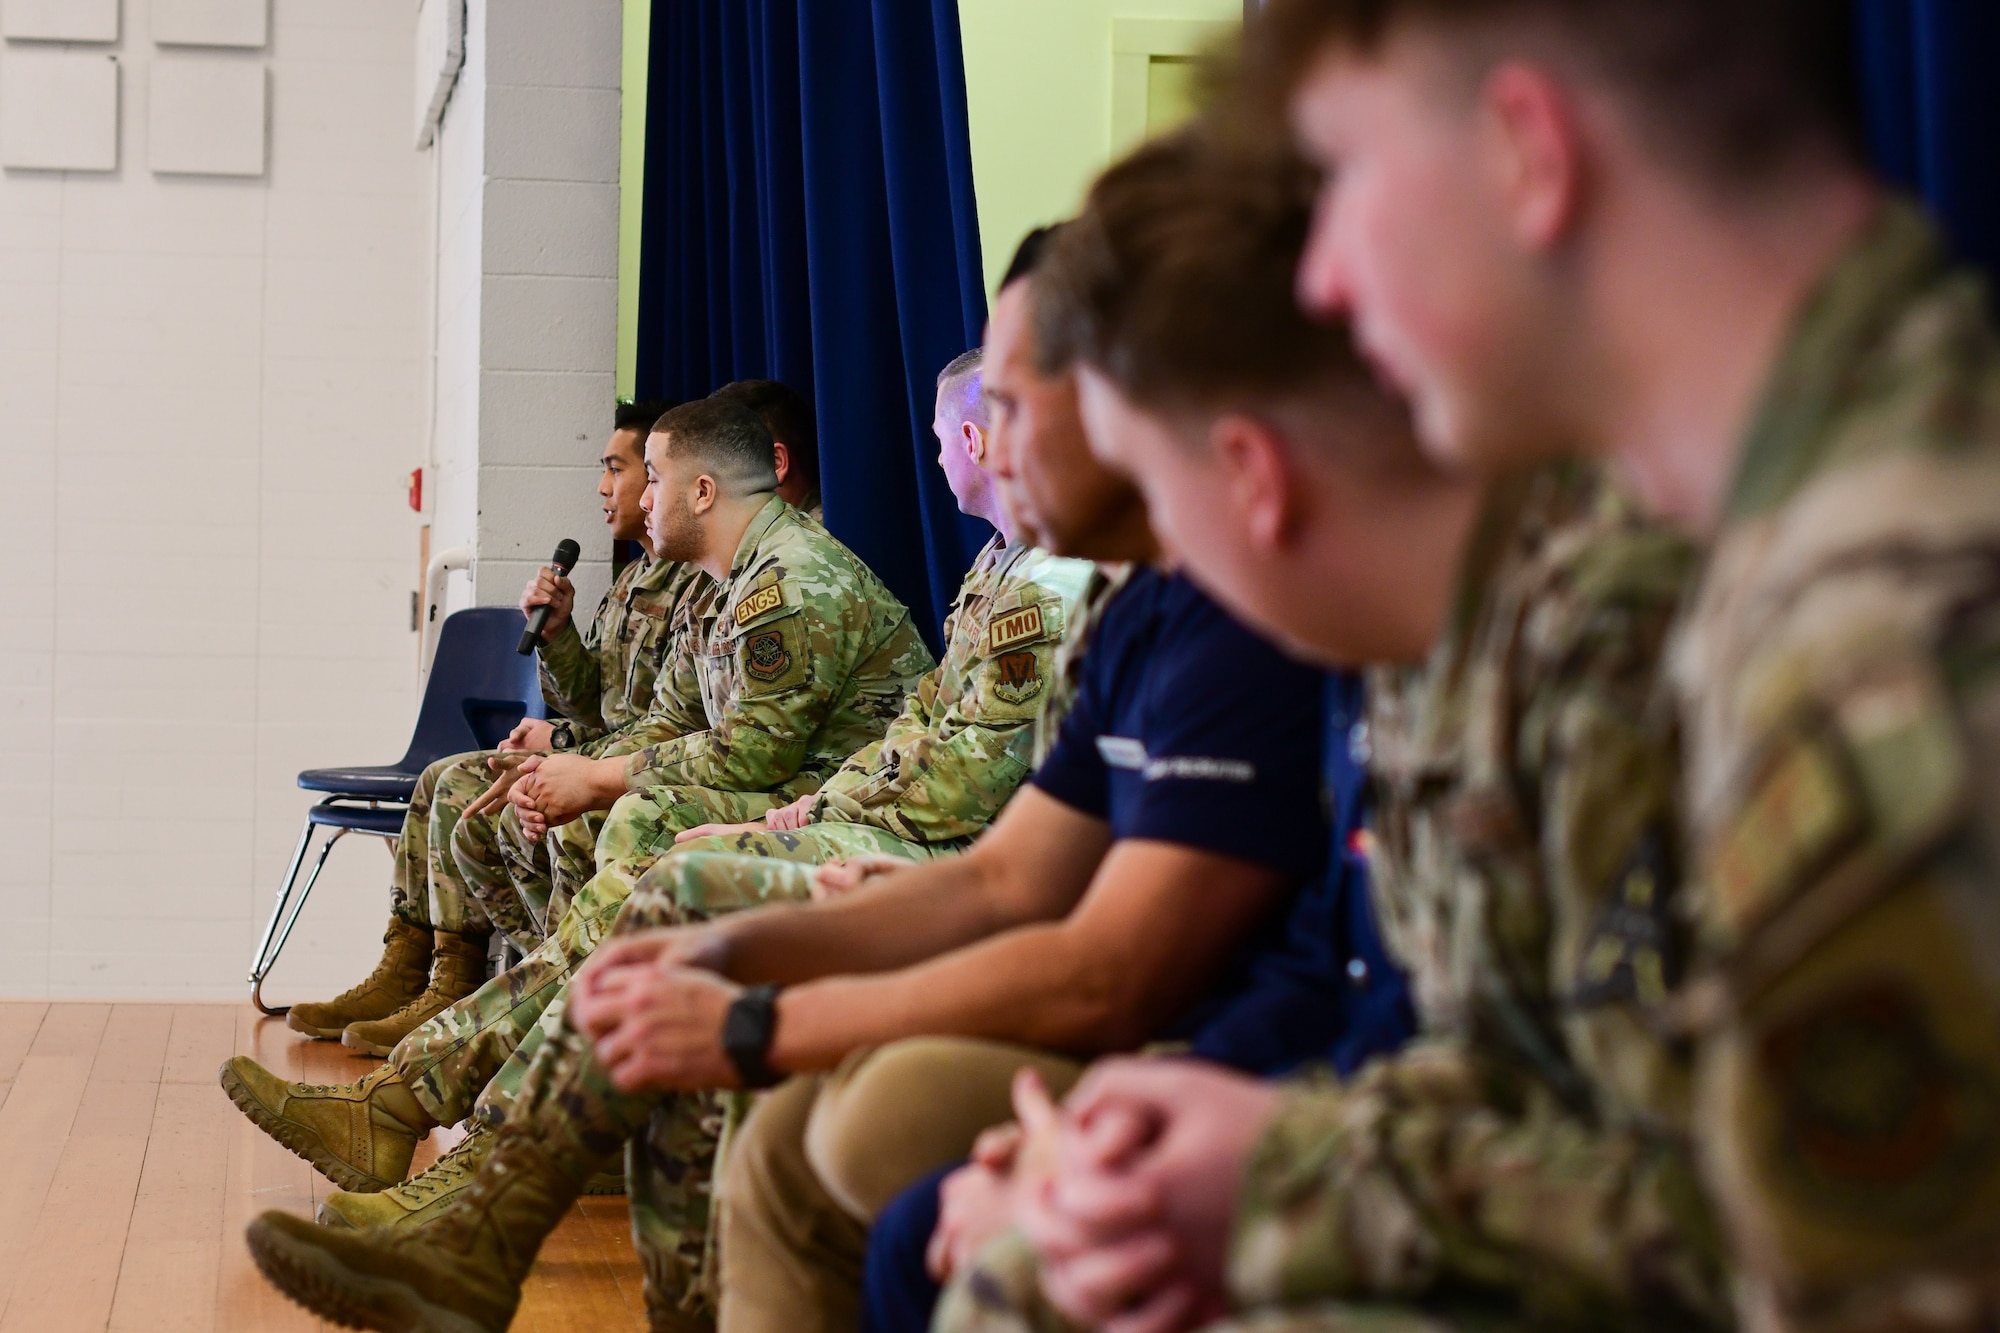 Military members sit on stage at Redwood Middle School in Napa, Calif., on Jan. 25, 2023.